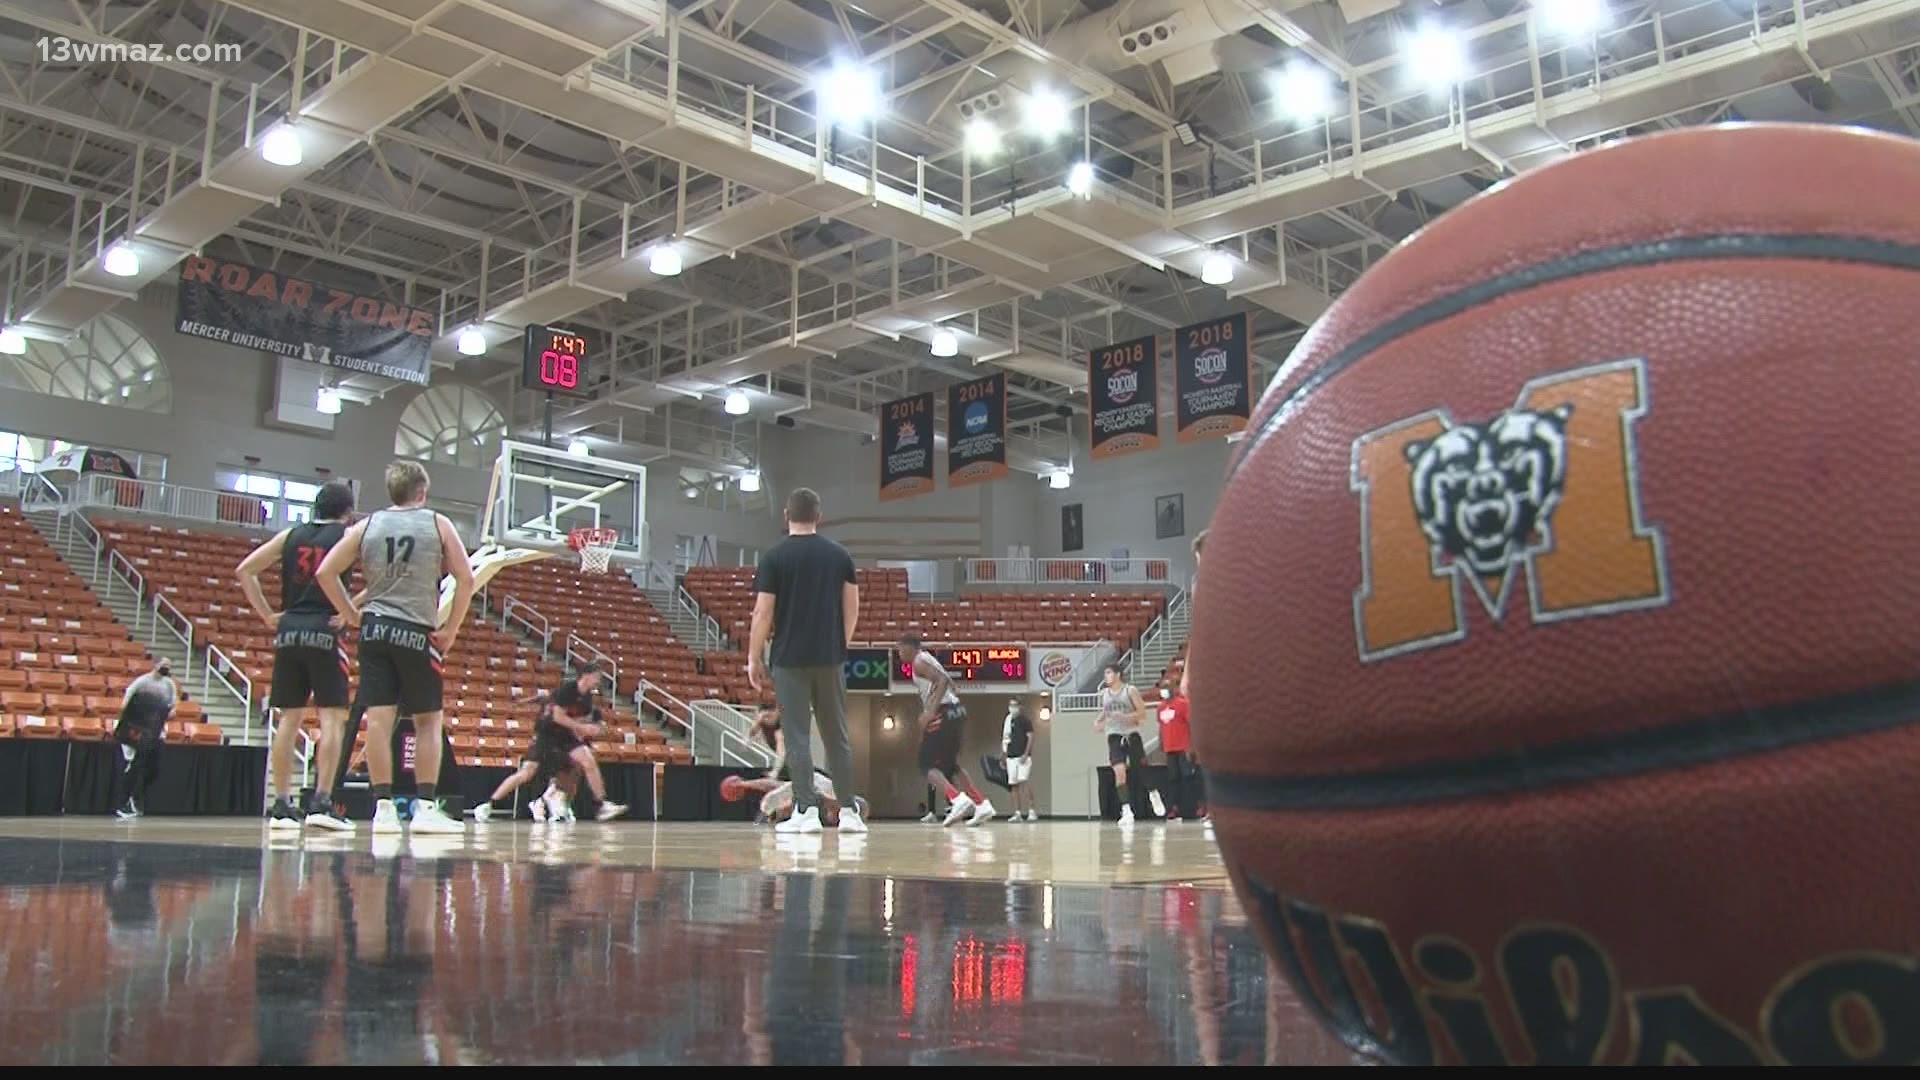 The Mercer Bears are busy game planning and preparing for the season amid COVID-19 restrictions. The Bears men's team finished 17-15 and 5th in the SoCon standings.